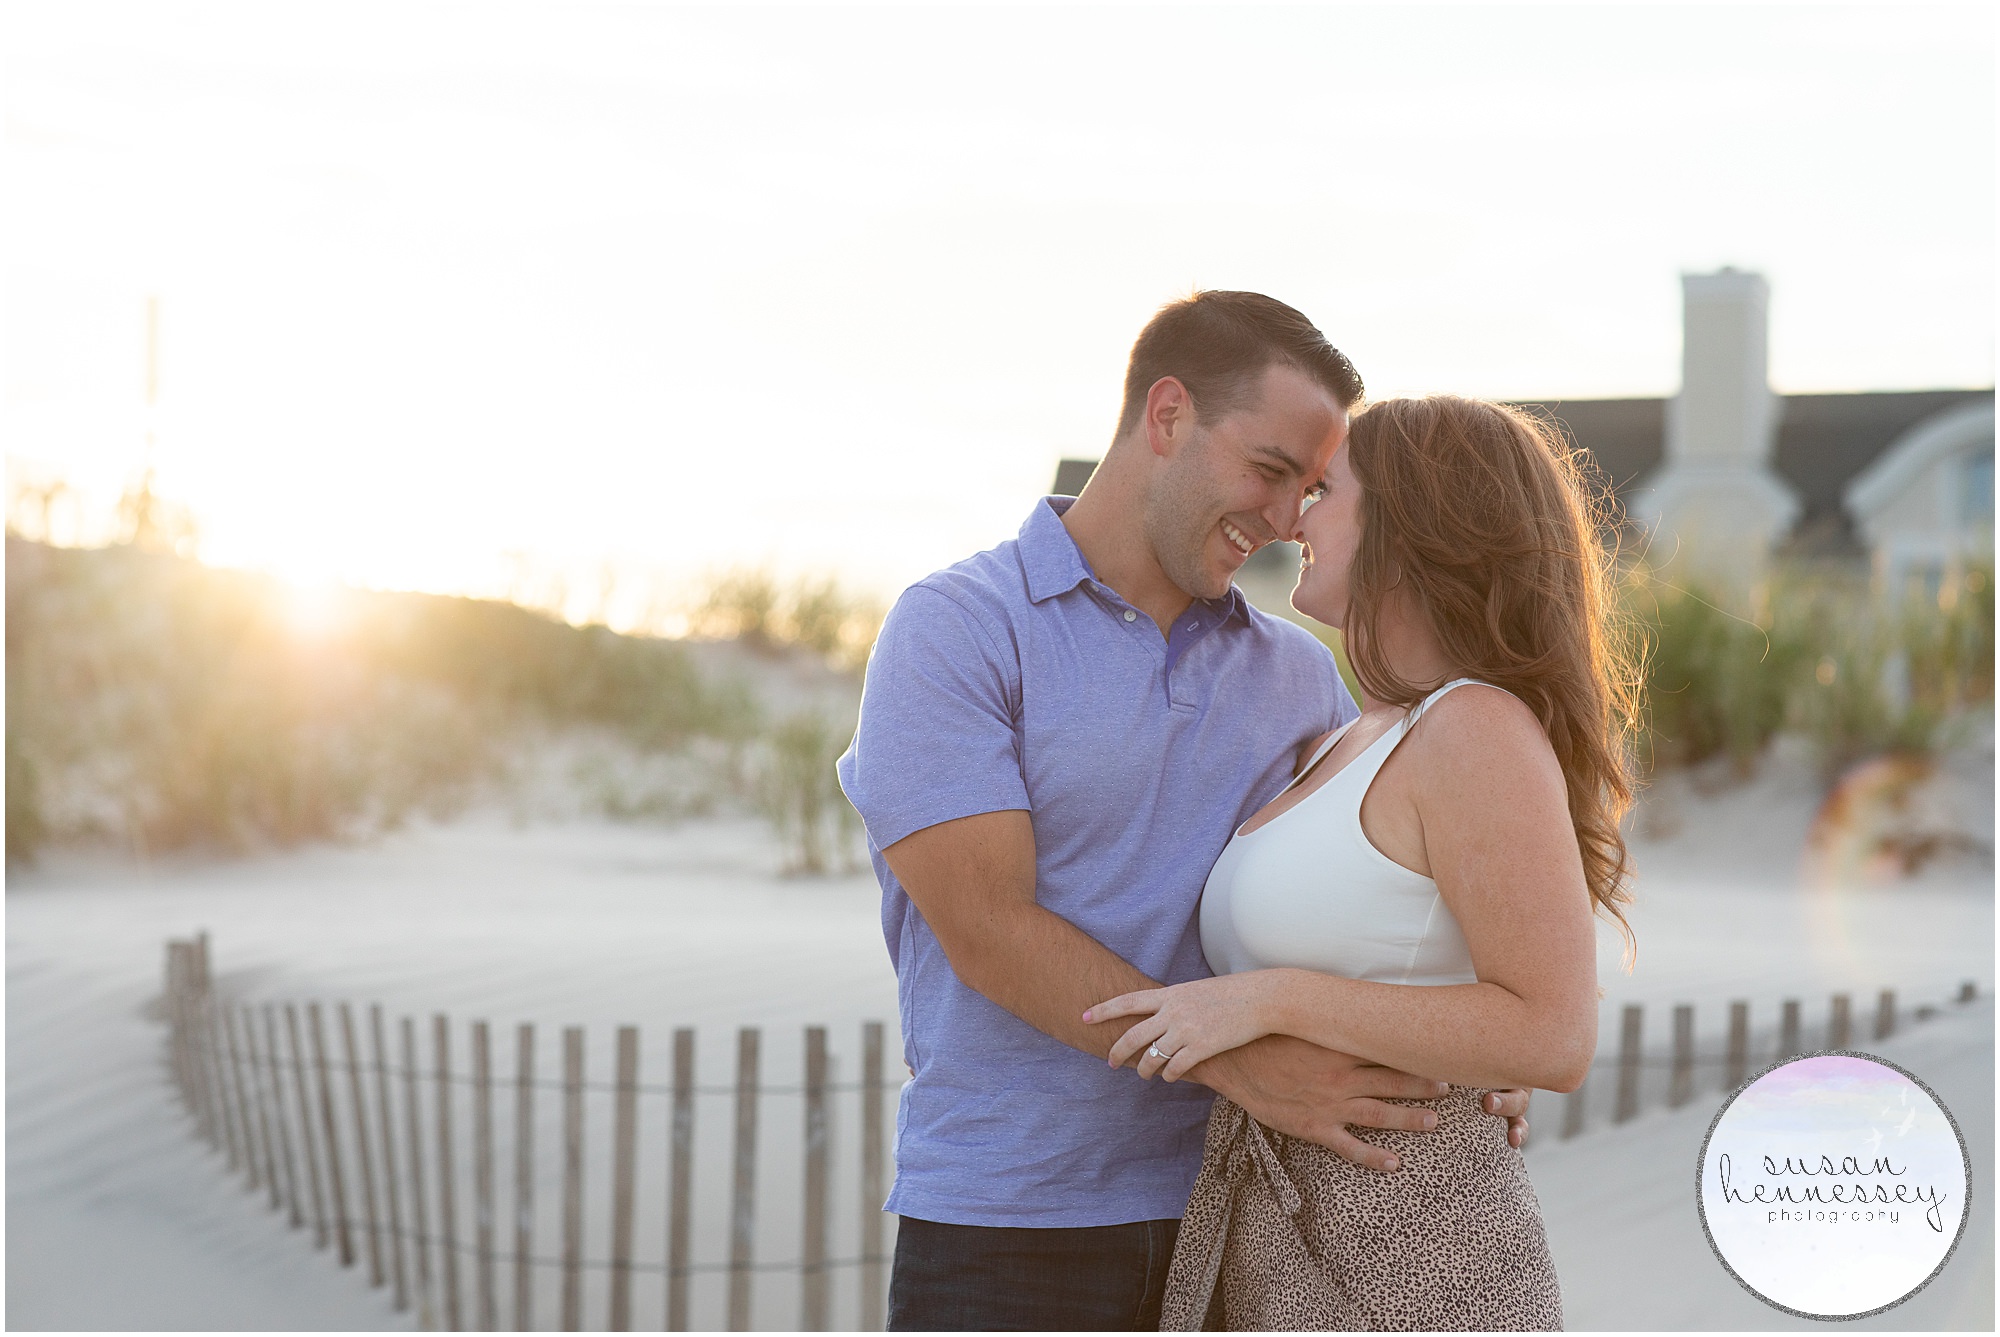 A golden hour portrait session on the beach 